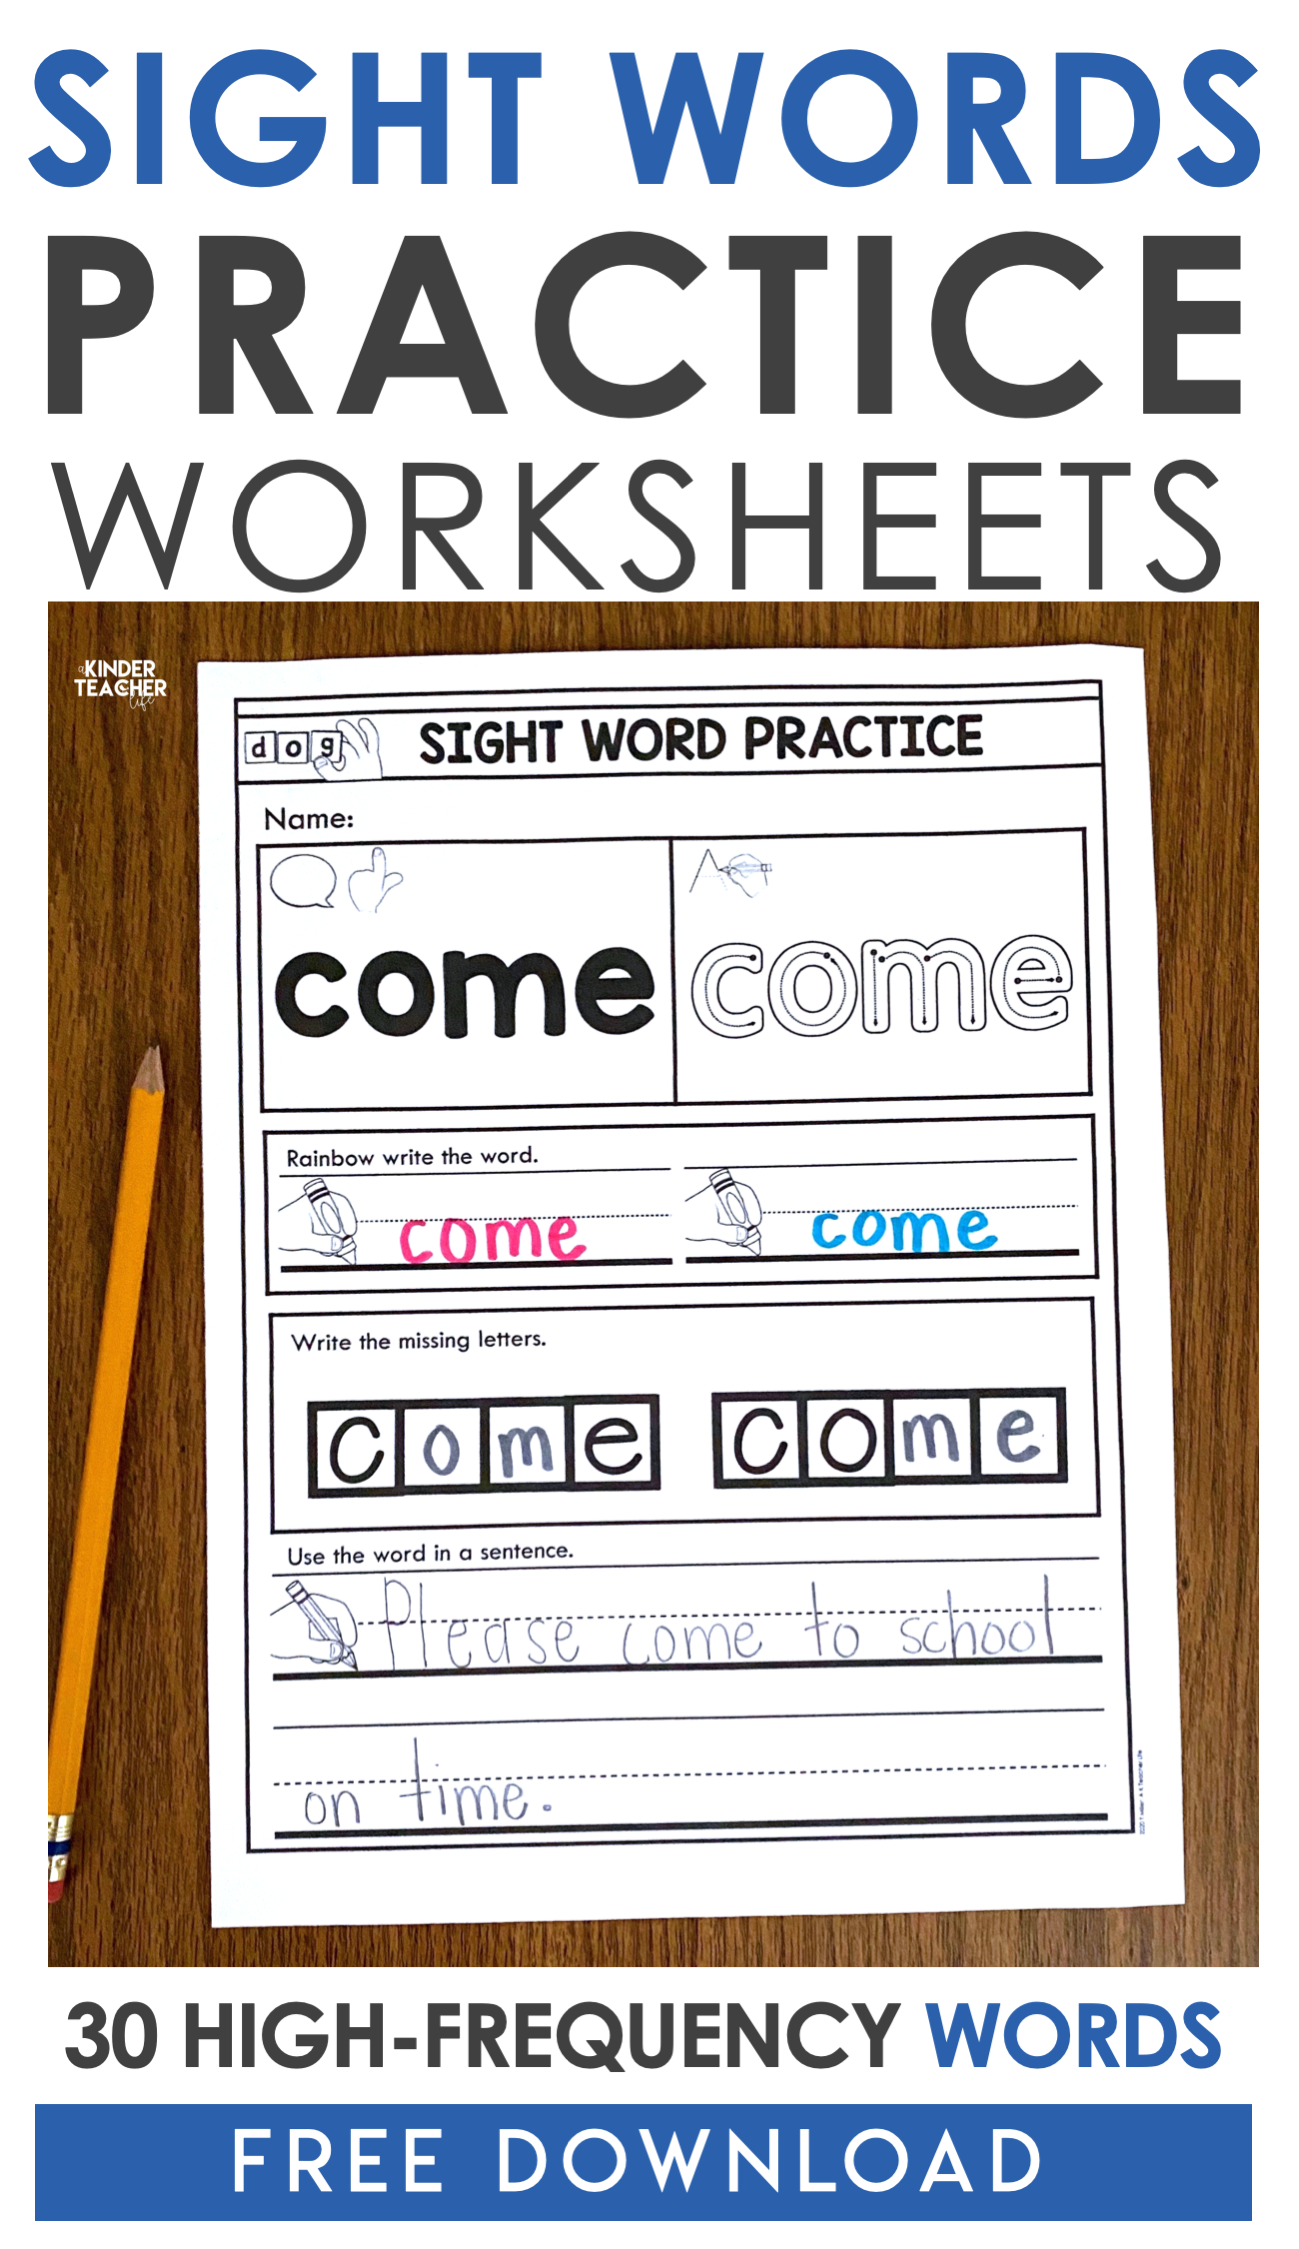 Read this article to learn how to introduce sight words during guided reading. After you finish reading the article, download 30 free sight word practice worksheets. 